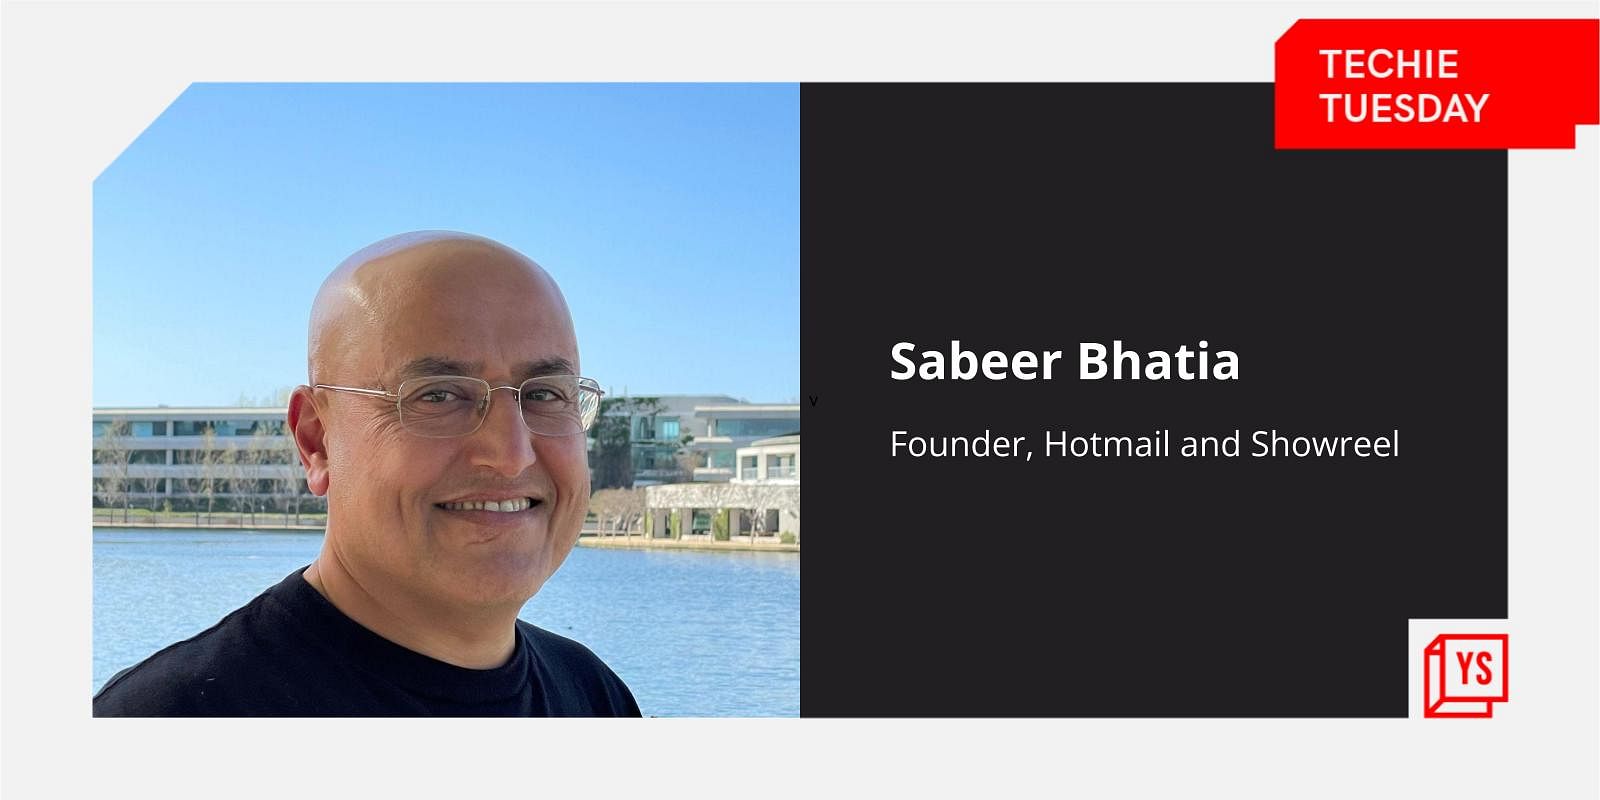 You are currently viewing [Techie Tuesday] From Hotmail to now Showreel, why Sabeer Bhatia believes there is more than one way to solve a problem